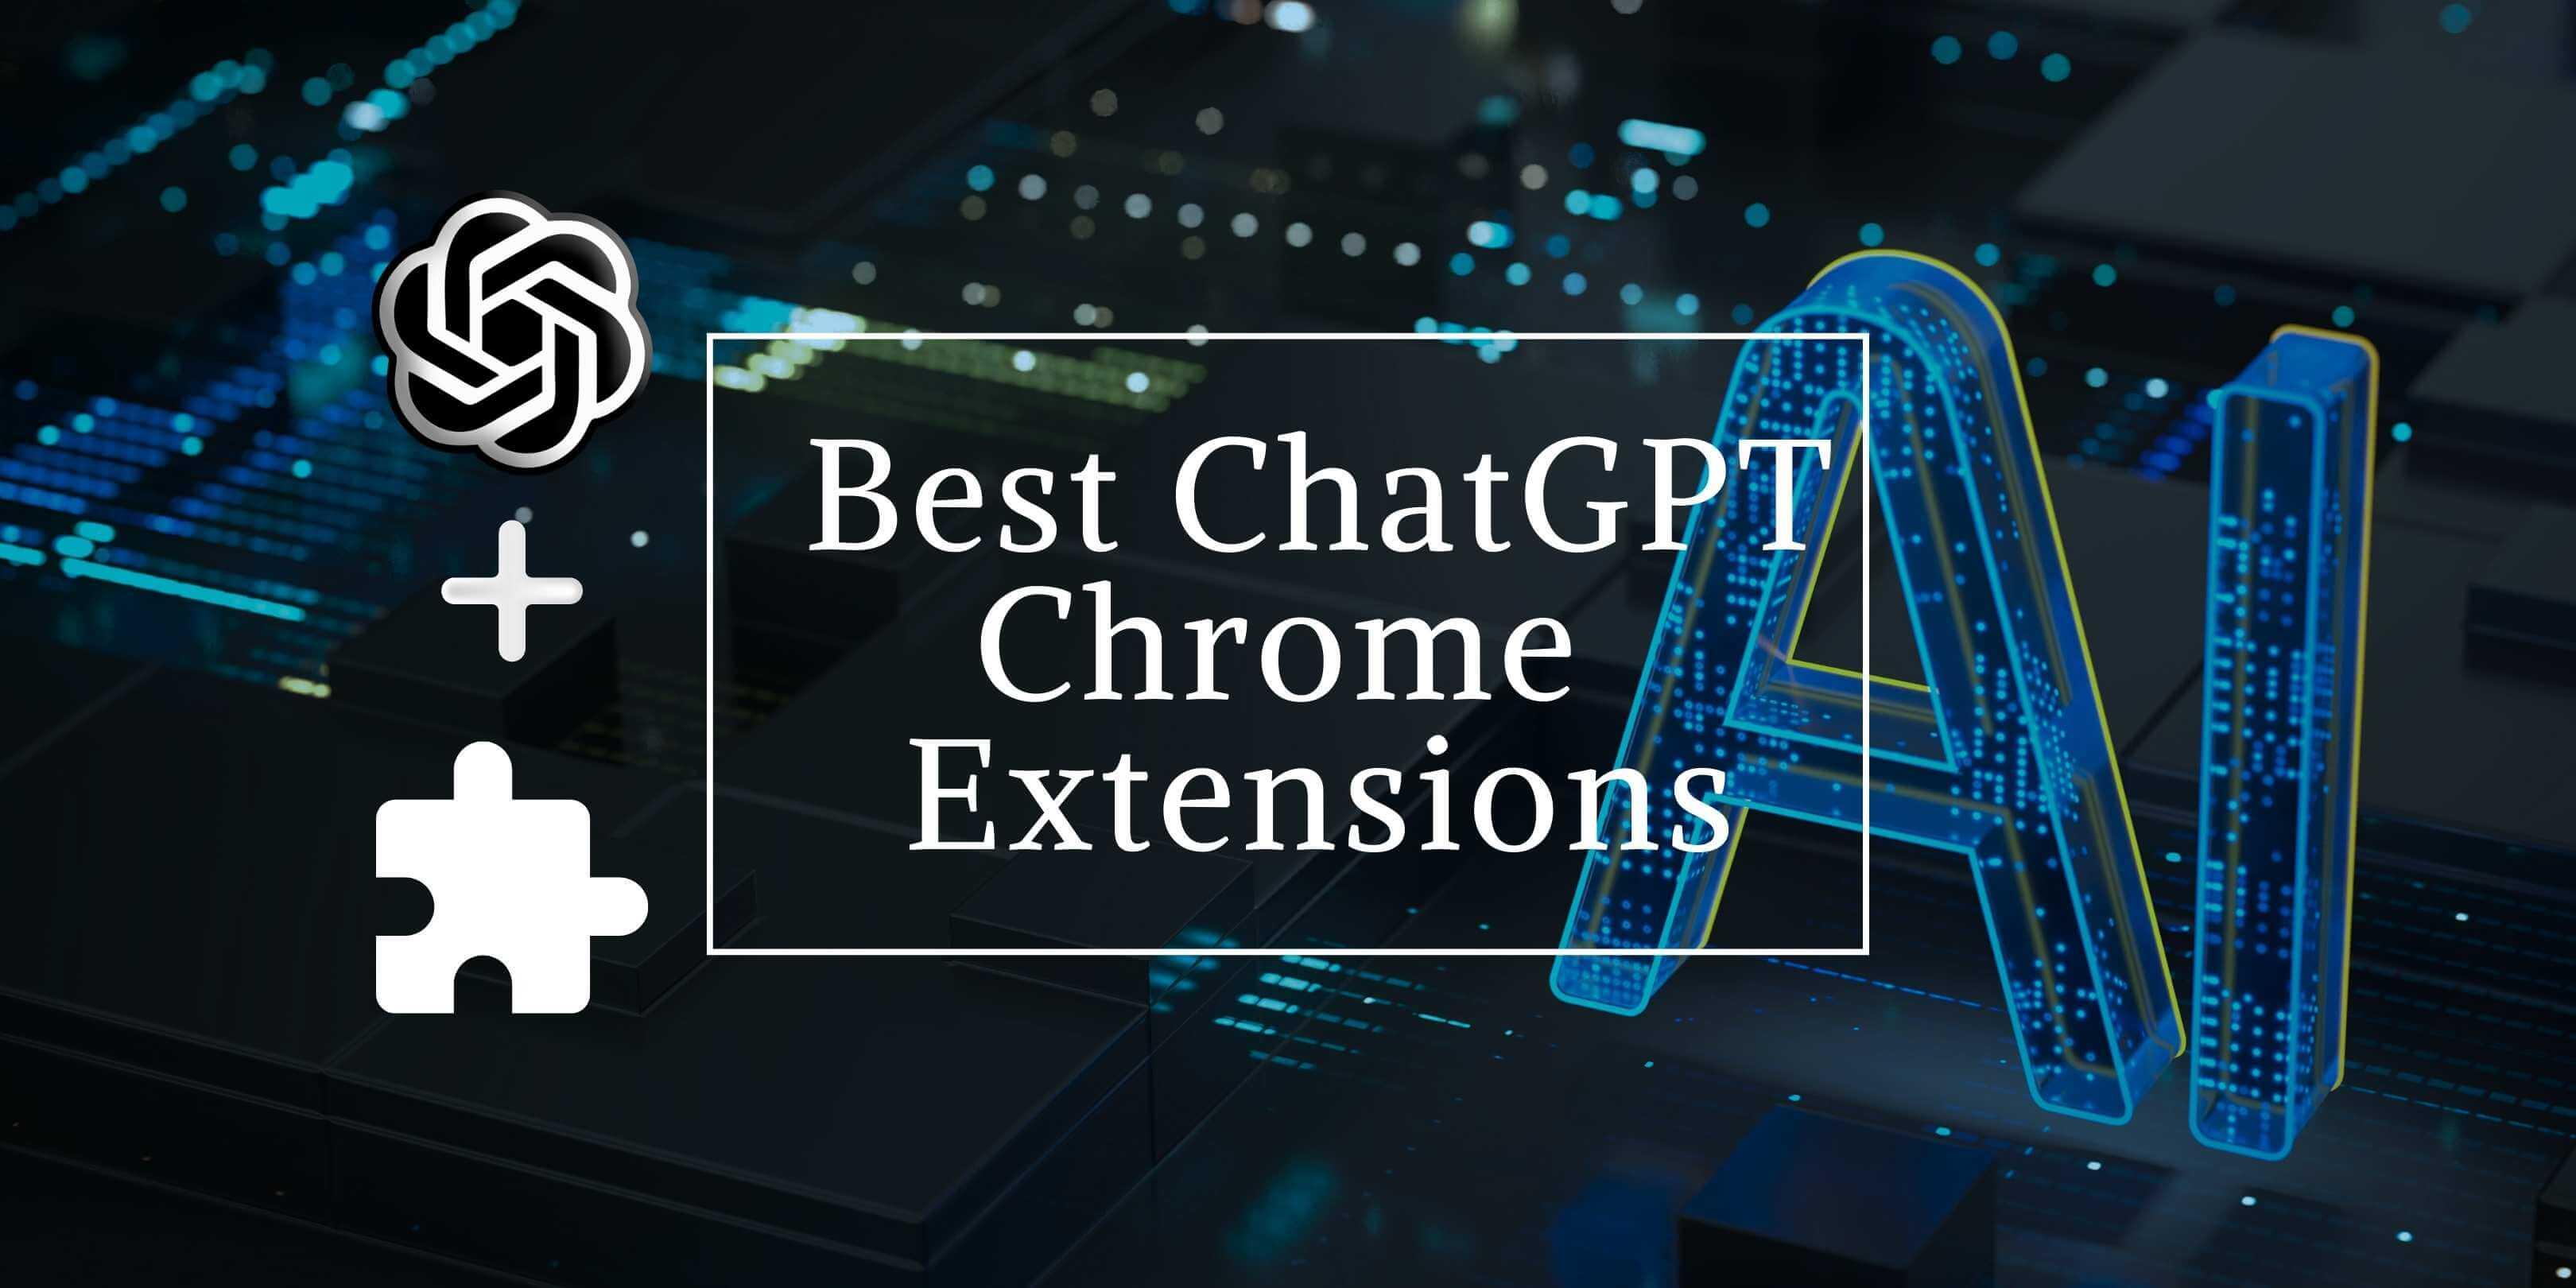 The Top 4 Free ChatGPT Chrome Extensions in 2023